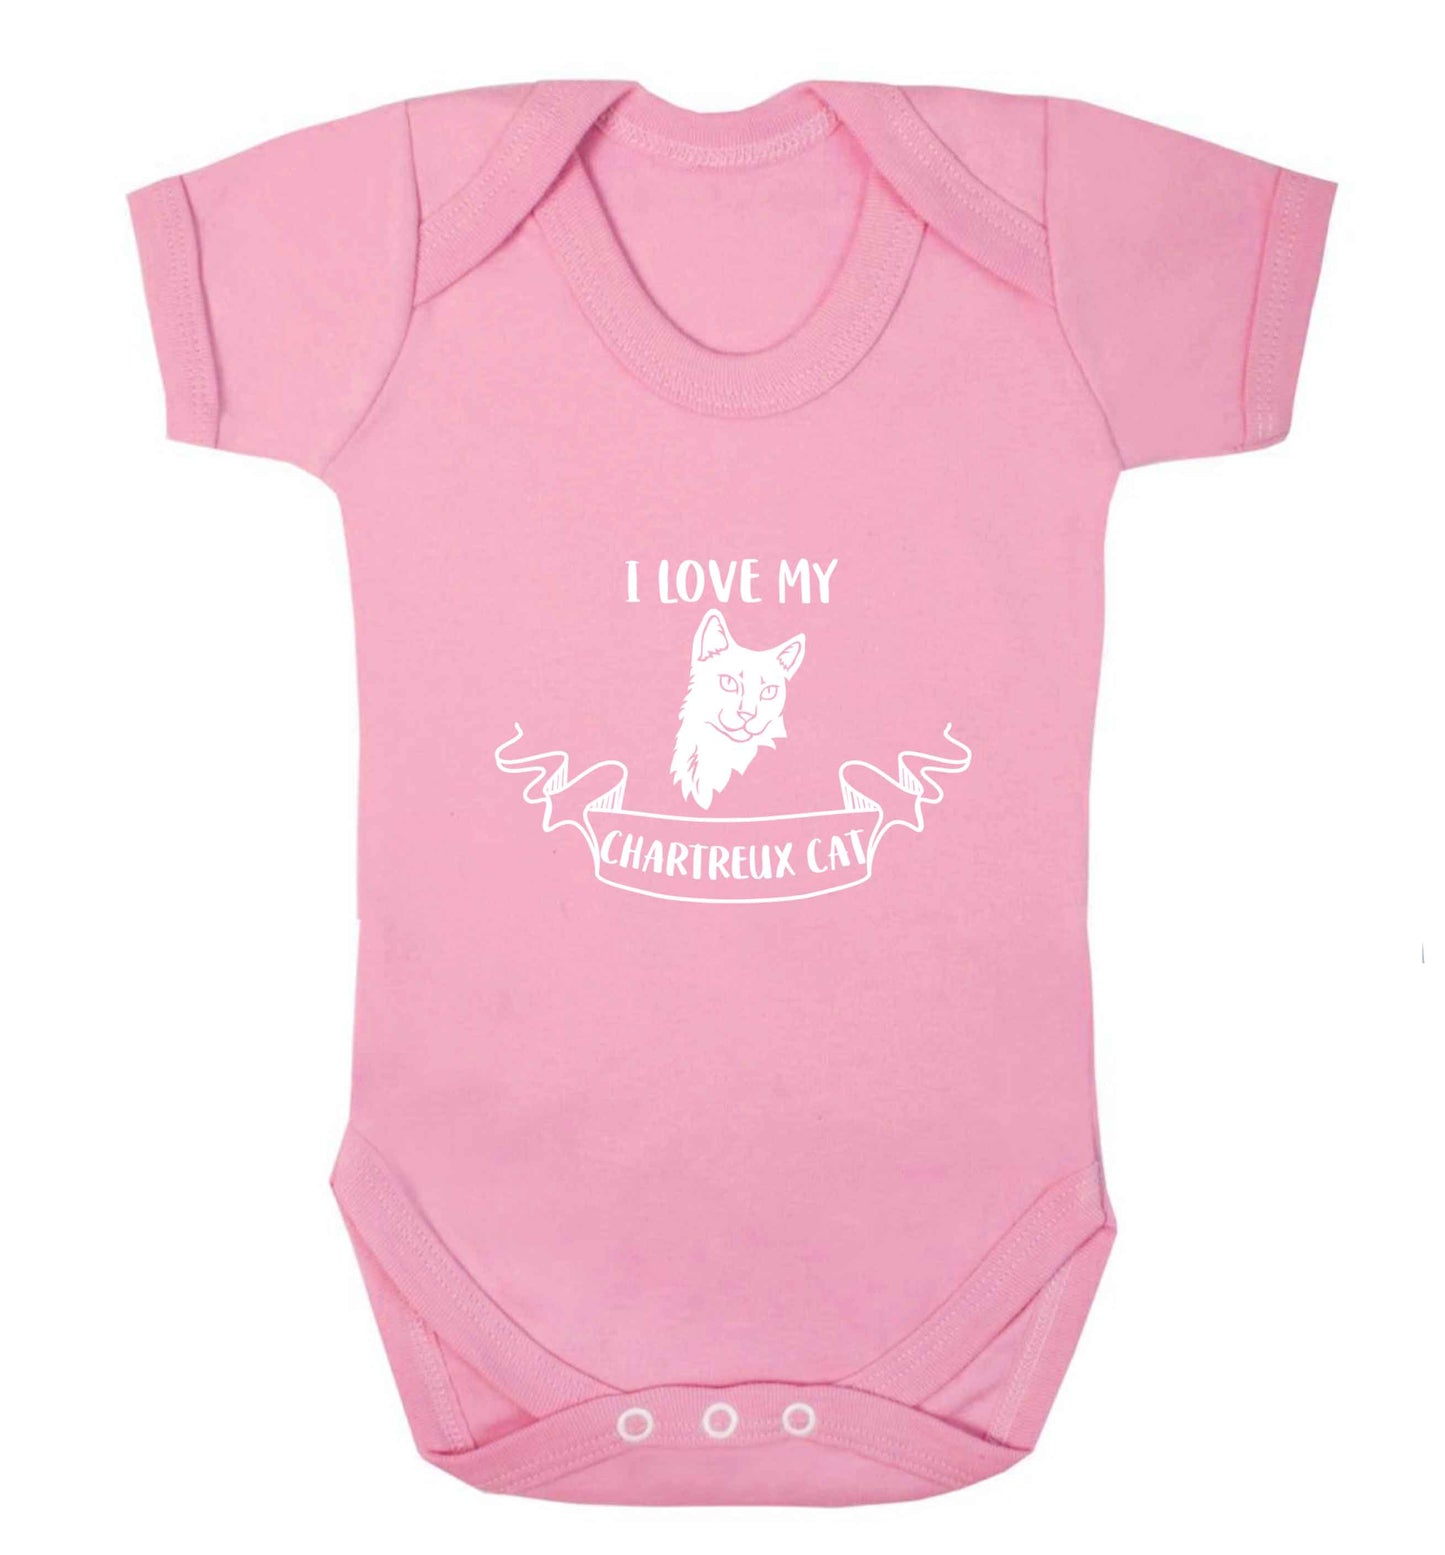 I love my chartreux cat baby vest pale pink 18-24 months